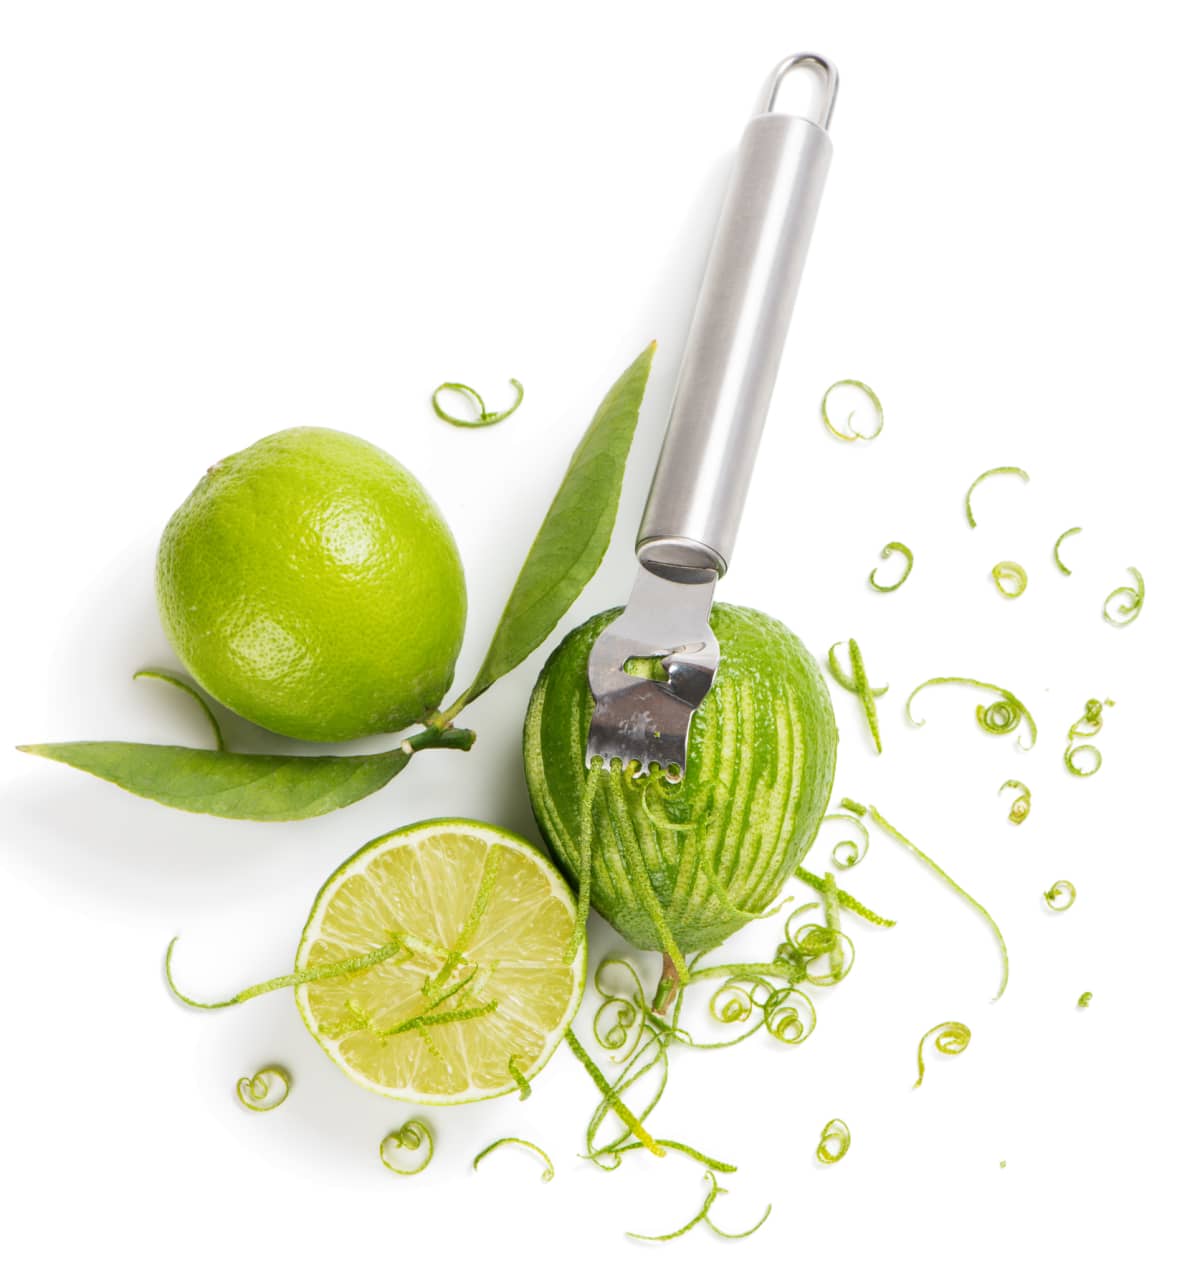 Zesting limes on white background